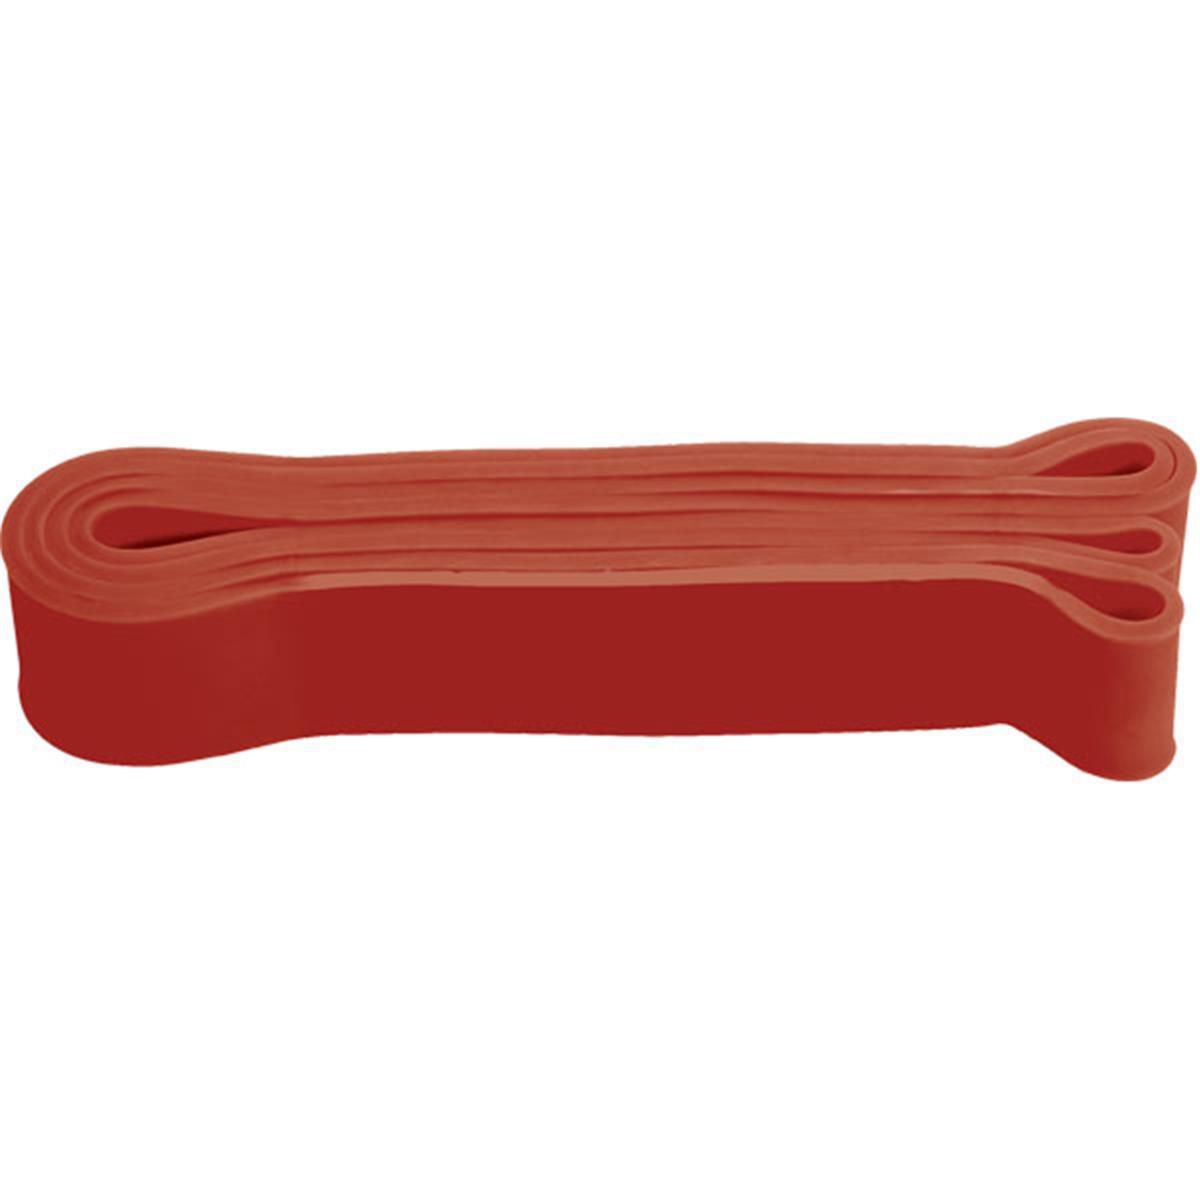 Image for HappyHealth 42 in. Stretch Training Band, Red at Kohl's.